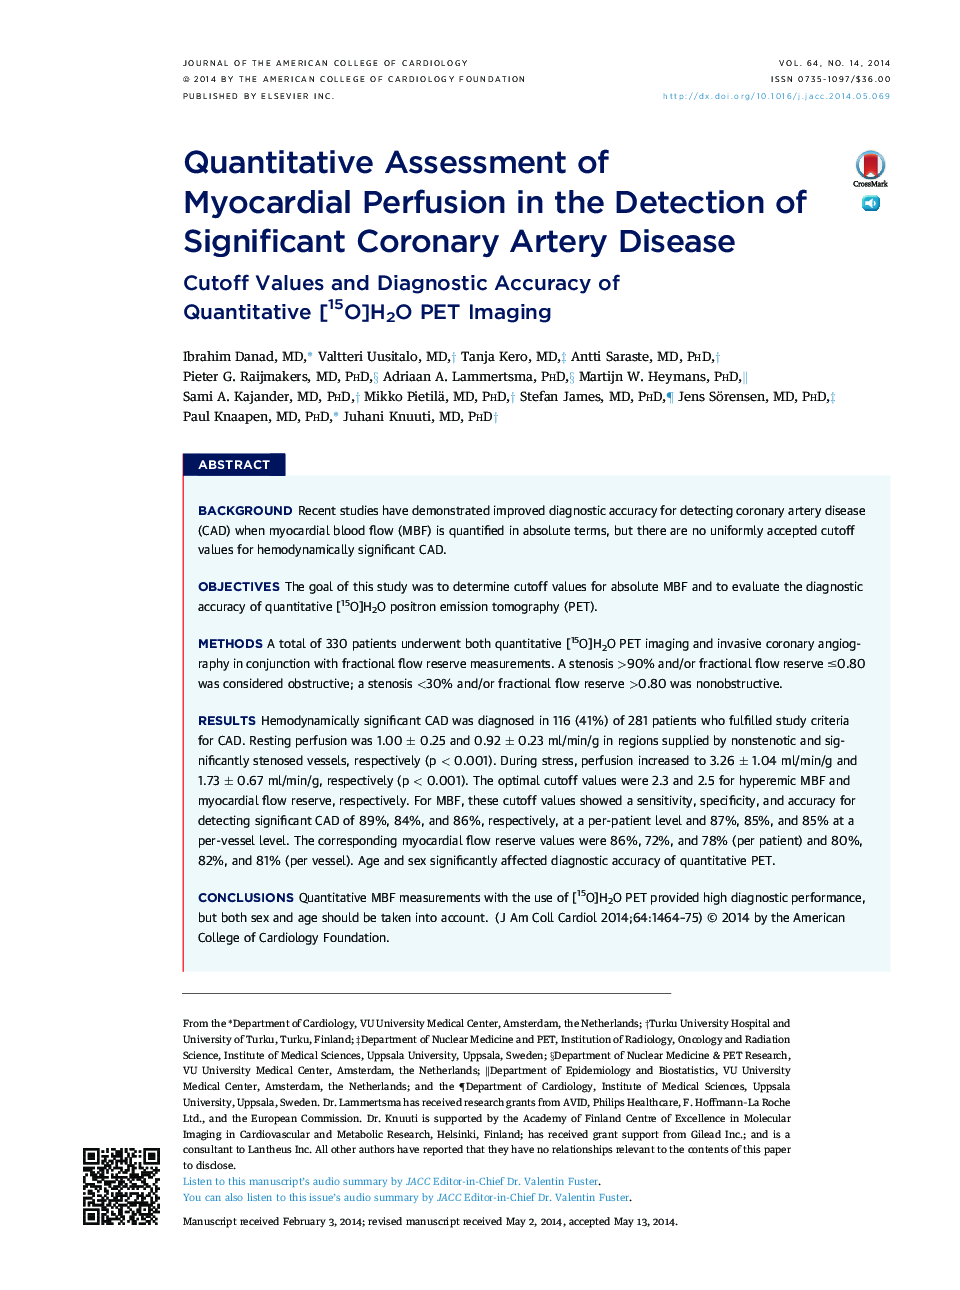 Quantitative Assessment of MyocardialÂ Perfusion in the Detection of Significant Coronary Artery Disease: Cutoff Values and Diagnostic Accuracy of Quantitative [15O]H2O PET Imaging